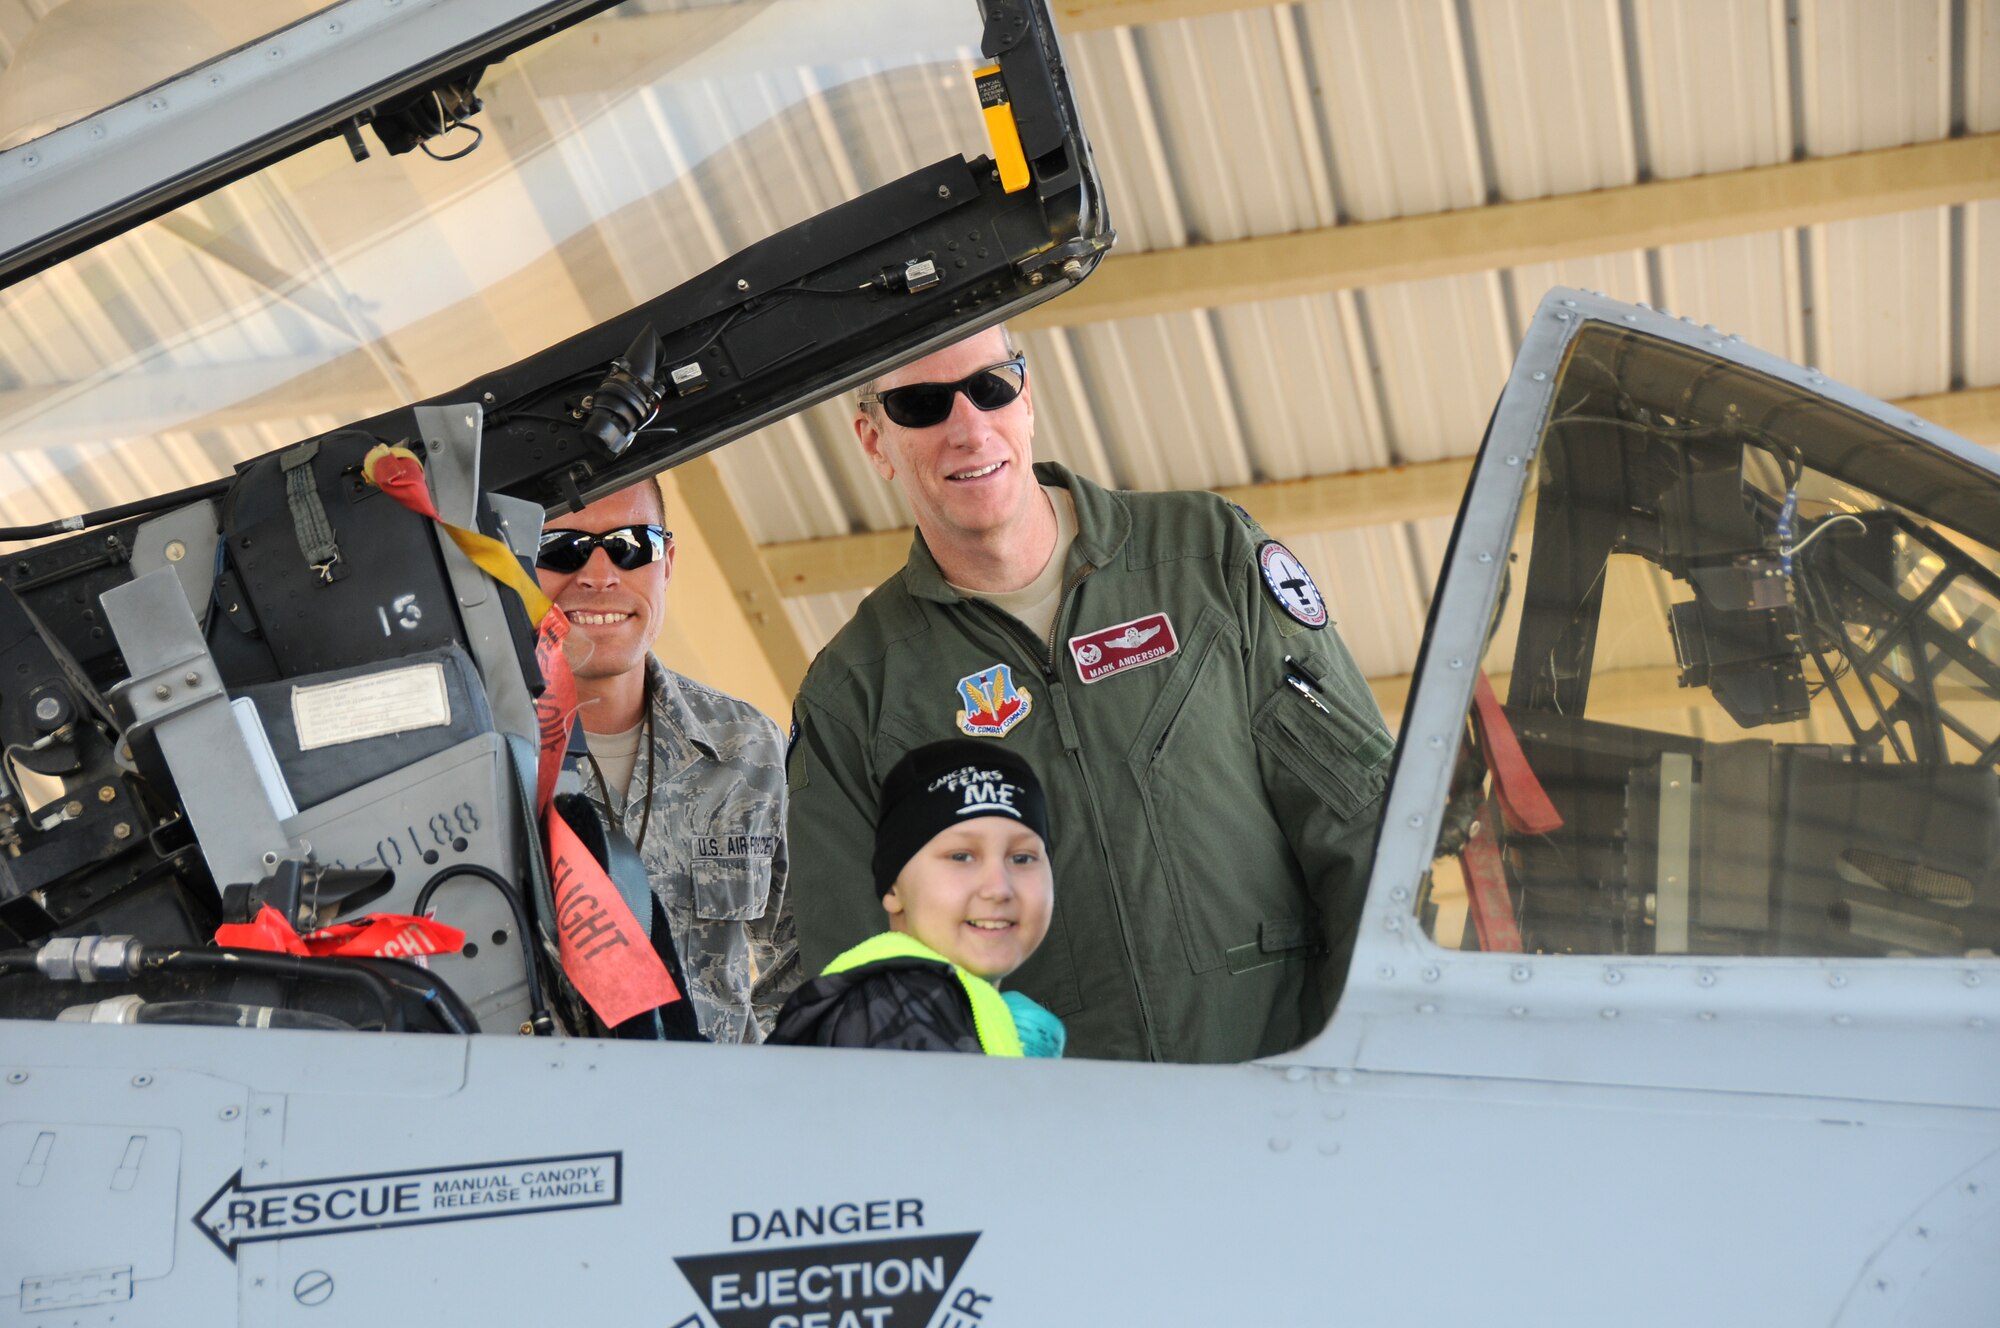 Tech. Sgt. Orion Stell, a crew chief with the 188th Aircraft Maintenance Squadron, and Col. Mark Anderson, 188th Fighter Wing commander, give pilot for a day Skyler Leroy an orientation to the A-10C Thunderbolt II "Warthog" during his visit to the 188th. (U.S. Air National Guard photo by Senior Airman John Hillier/188th Fighter Wing Public Affairs)